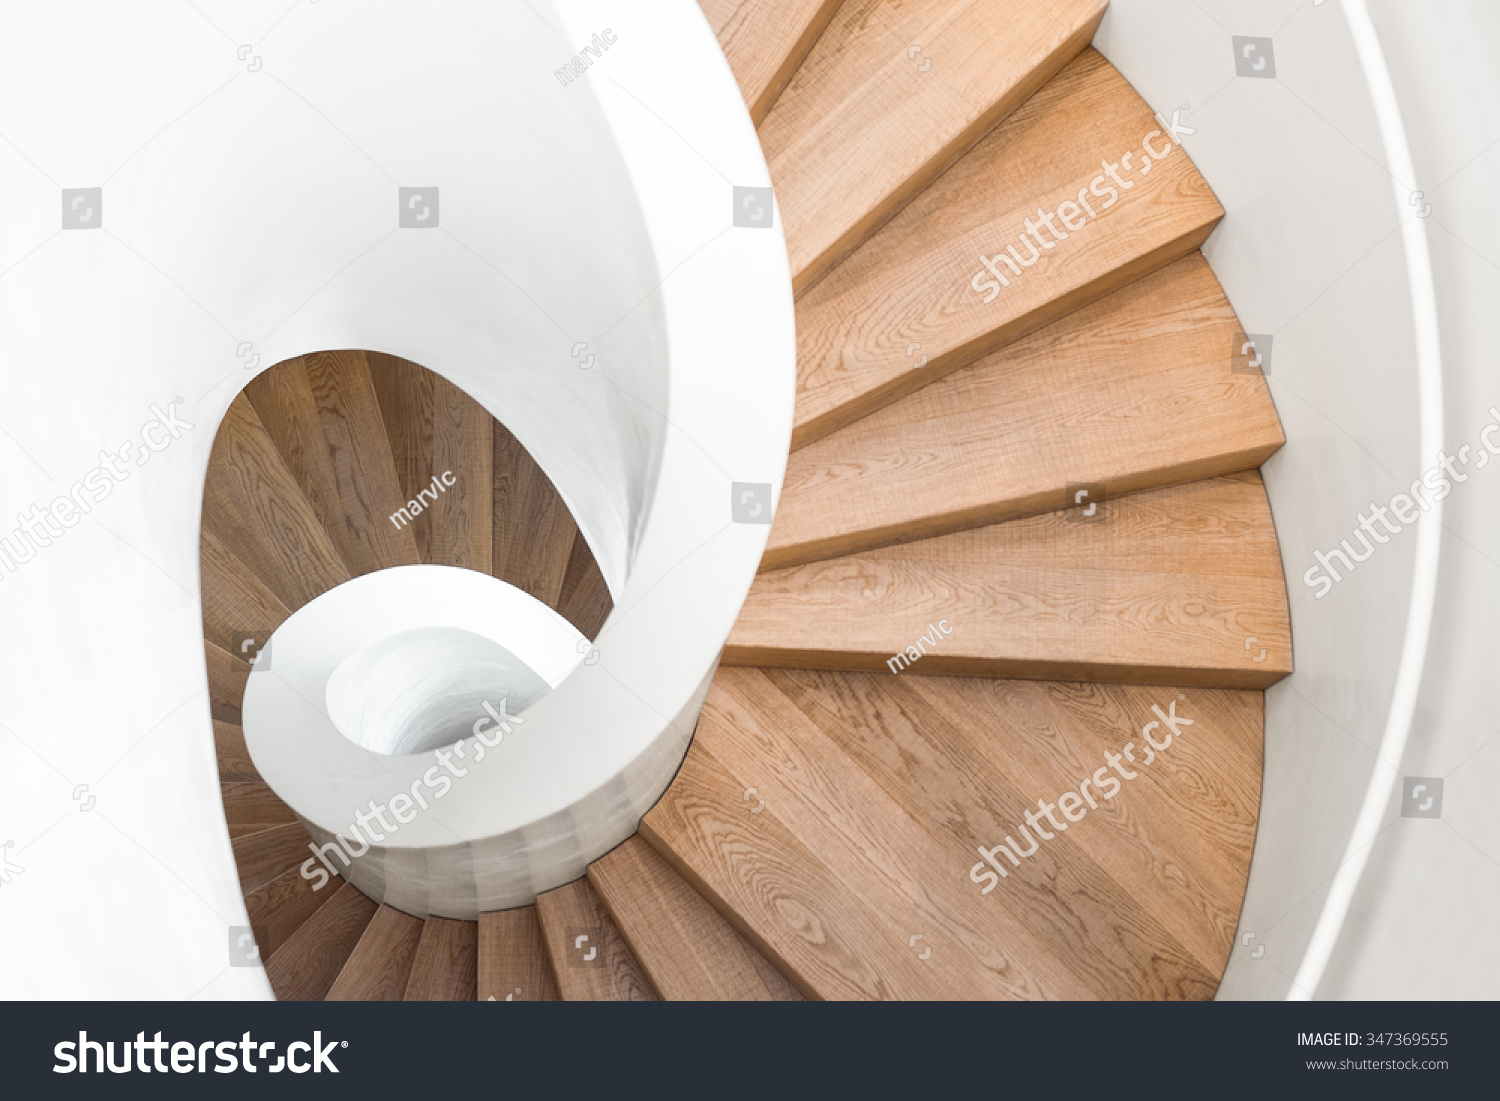 Spiral staircase inside building, Modern spiral staircase, Luxurious interior staircase, Home stair symbol, Modern stairs, Communicating element house #347369555